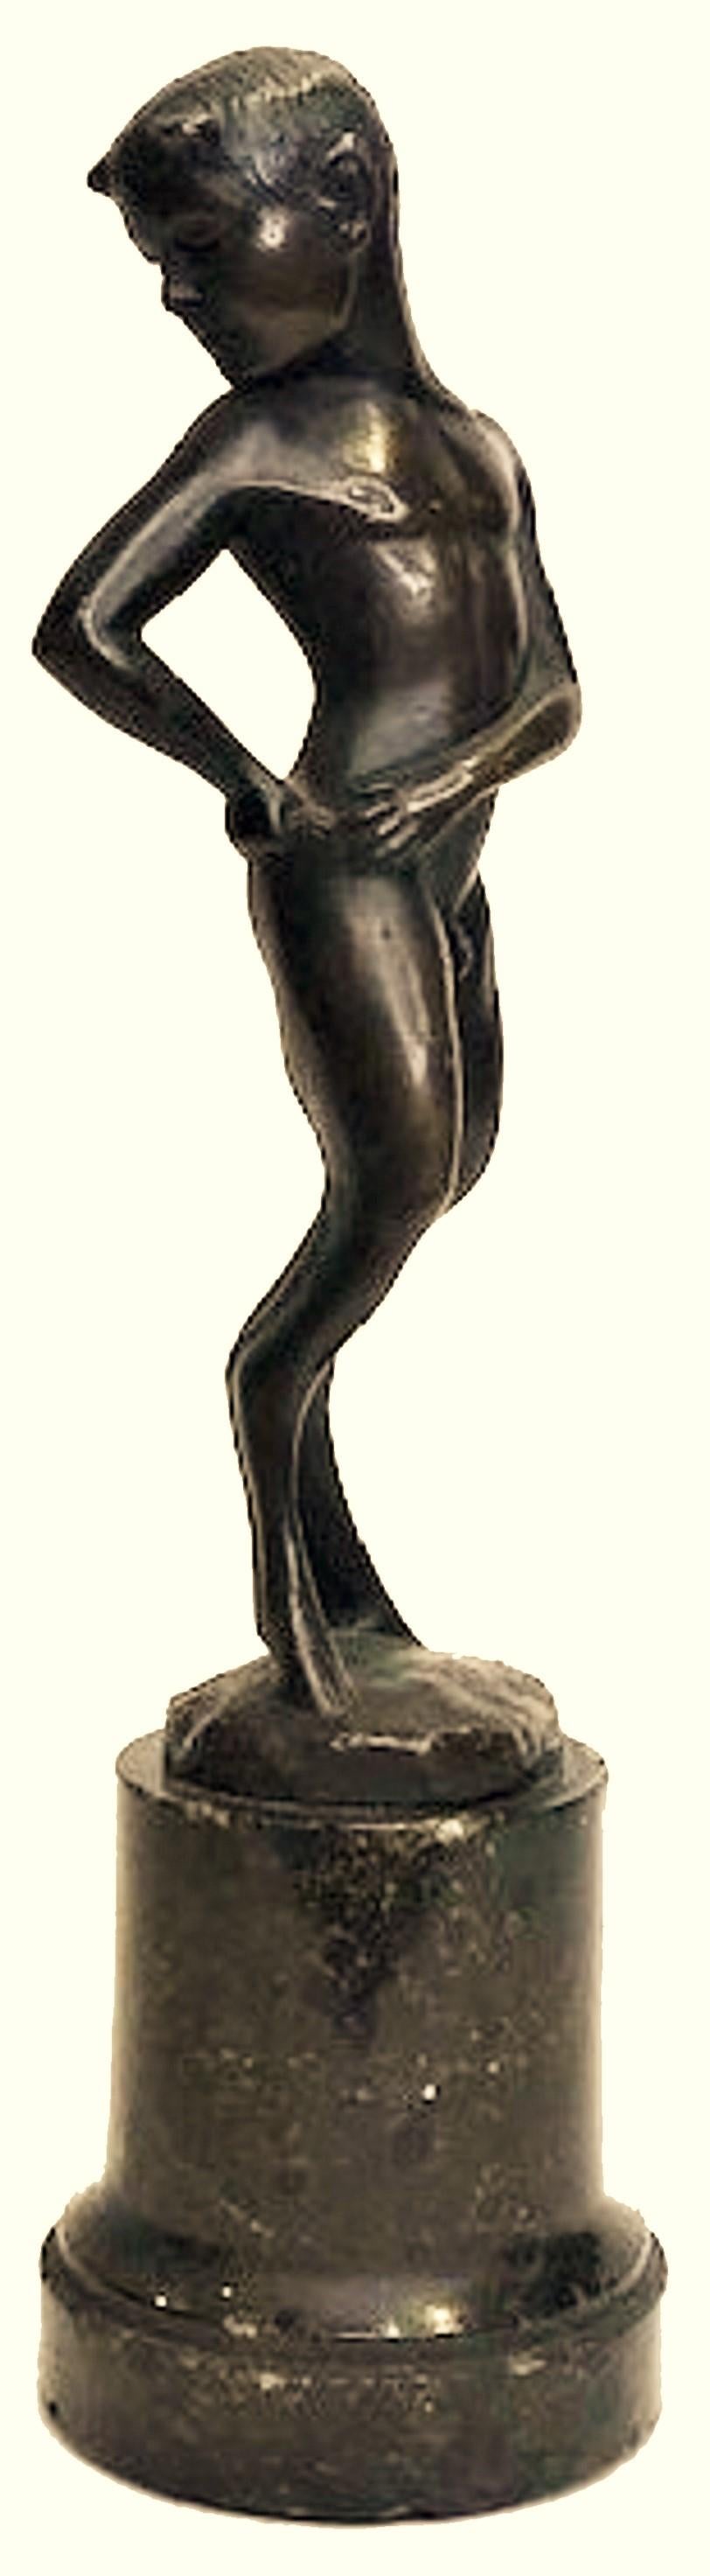 Probably Austrian, this lovely Jugenstil desk-sized black-patinated bronze figurine on its original marble pedestal depicts a fawn youth, checking the size of his tail to see how much he has grown and matured.